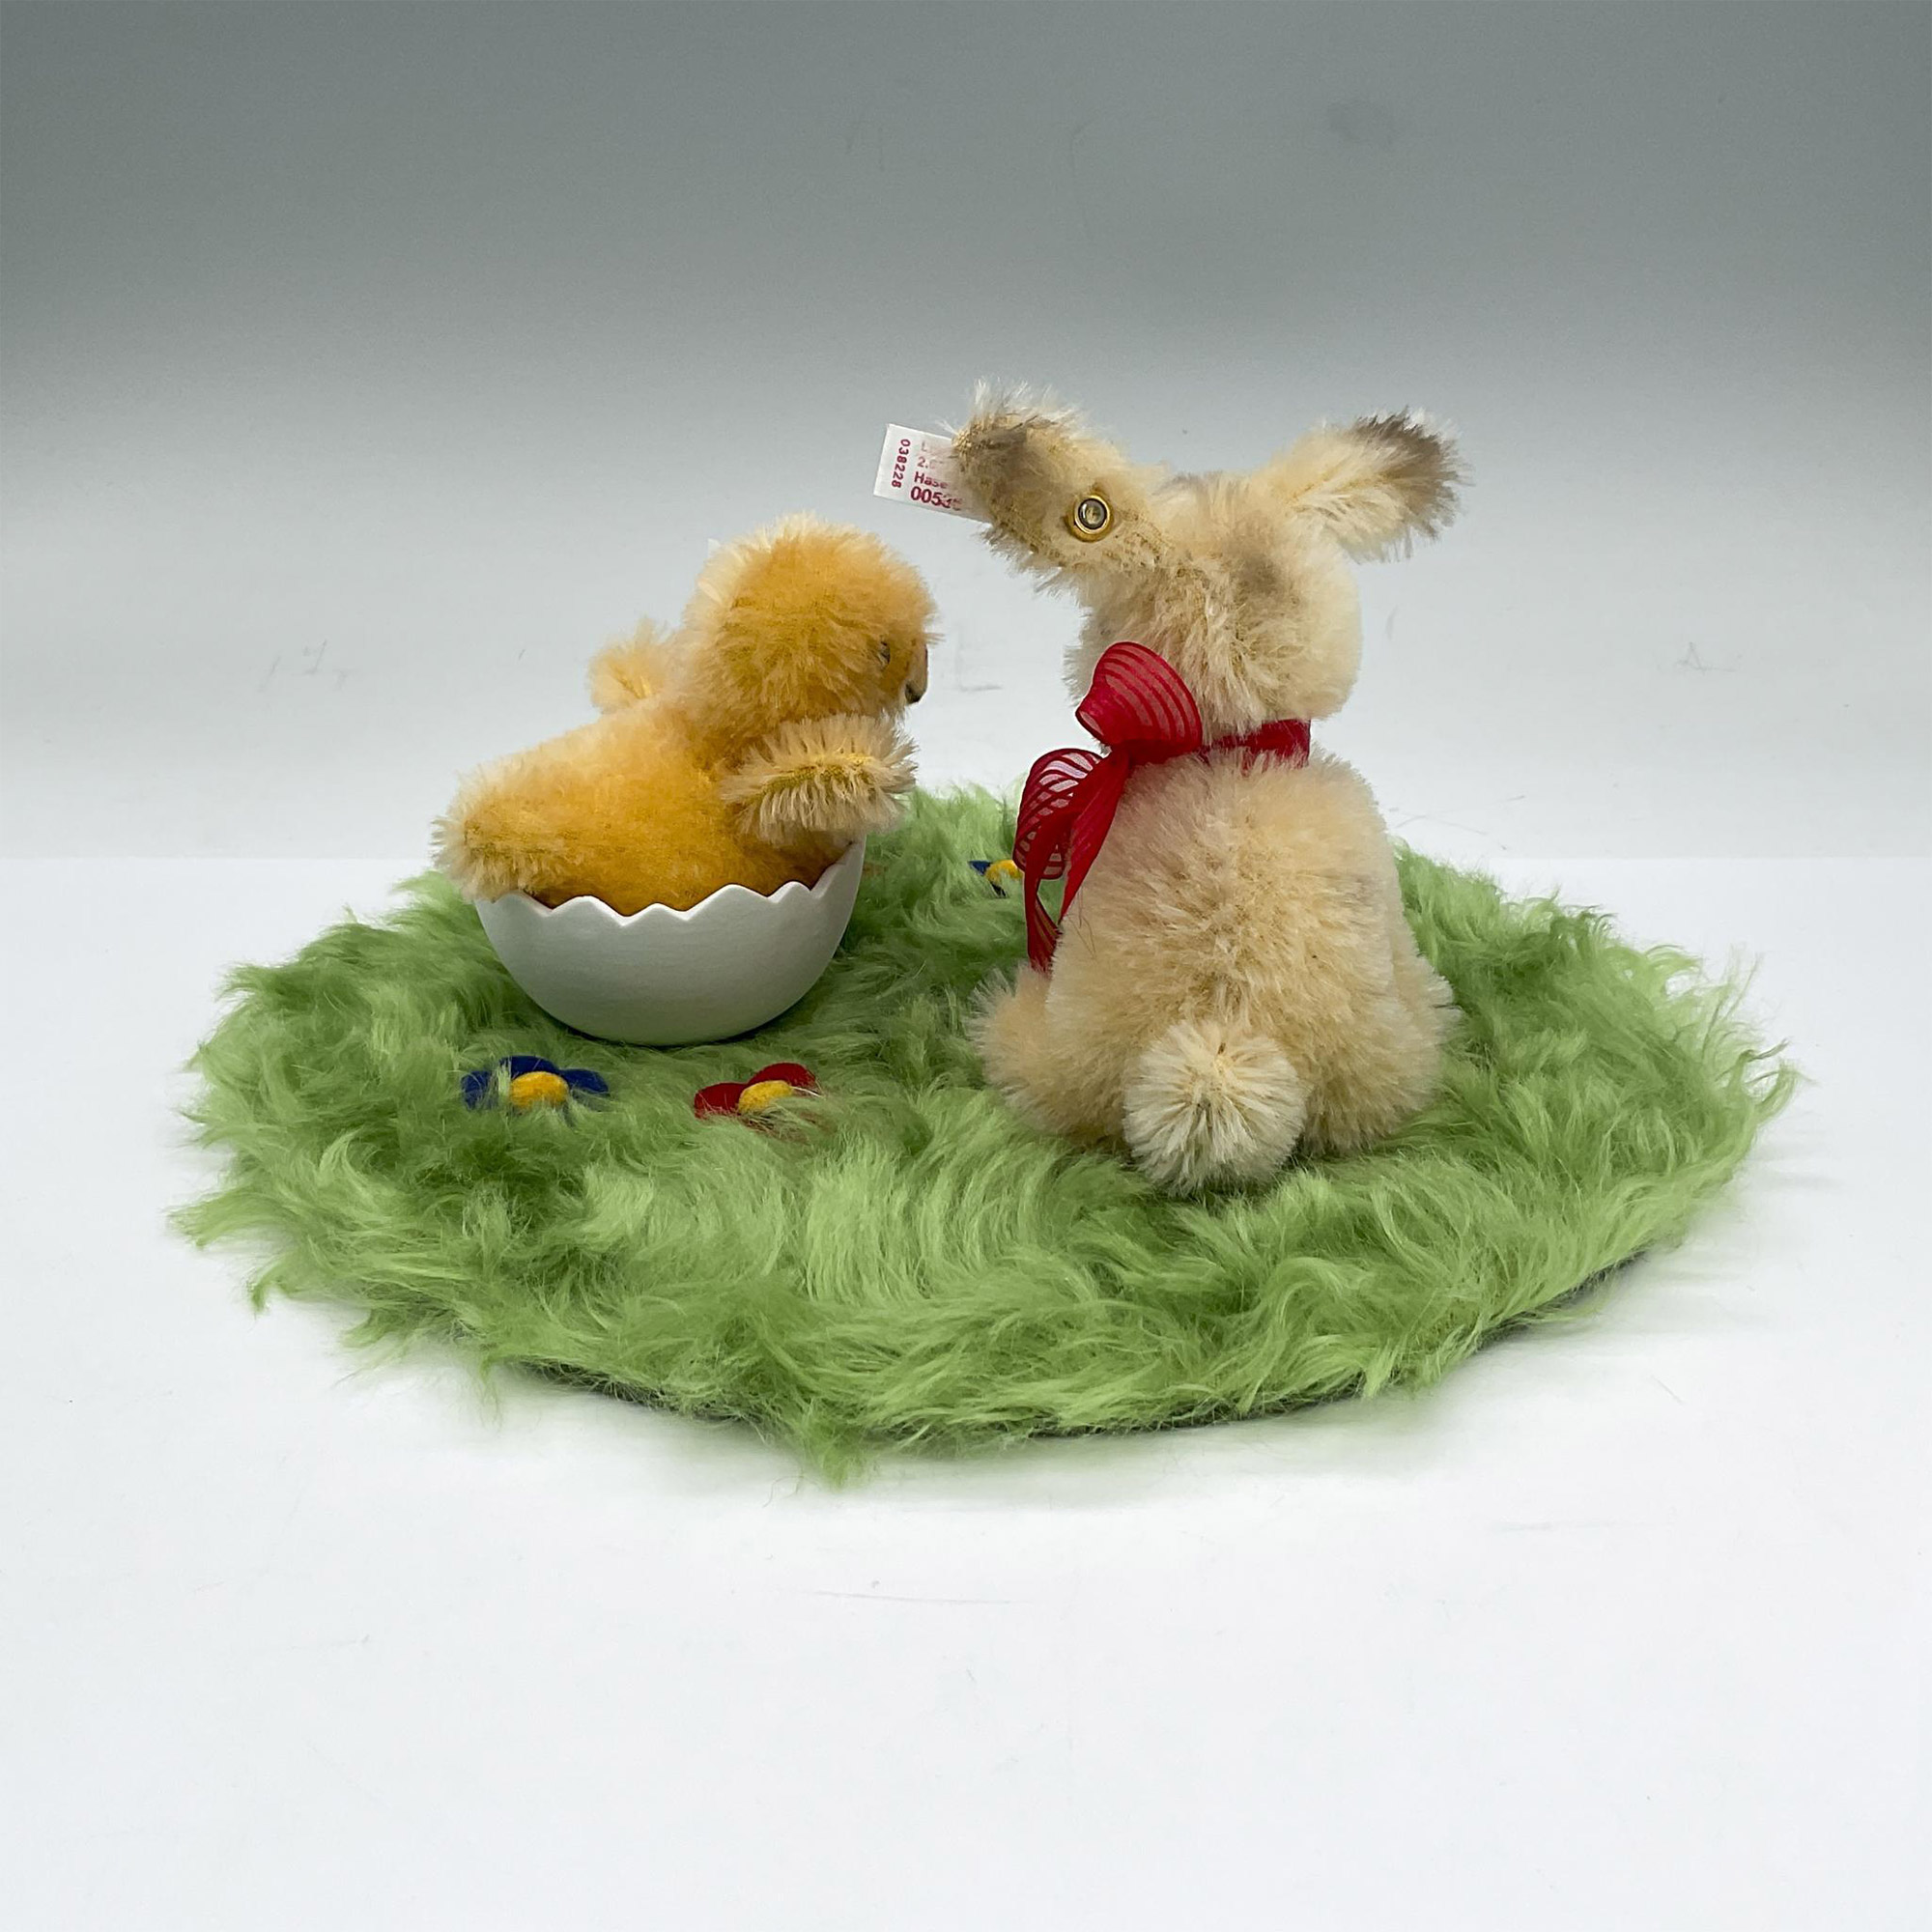 Steiff Mohair Figures, Easter Diorama of Bunny and Chick - Image 3 of 5